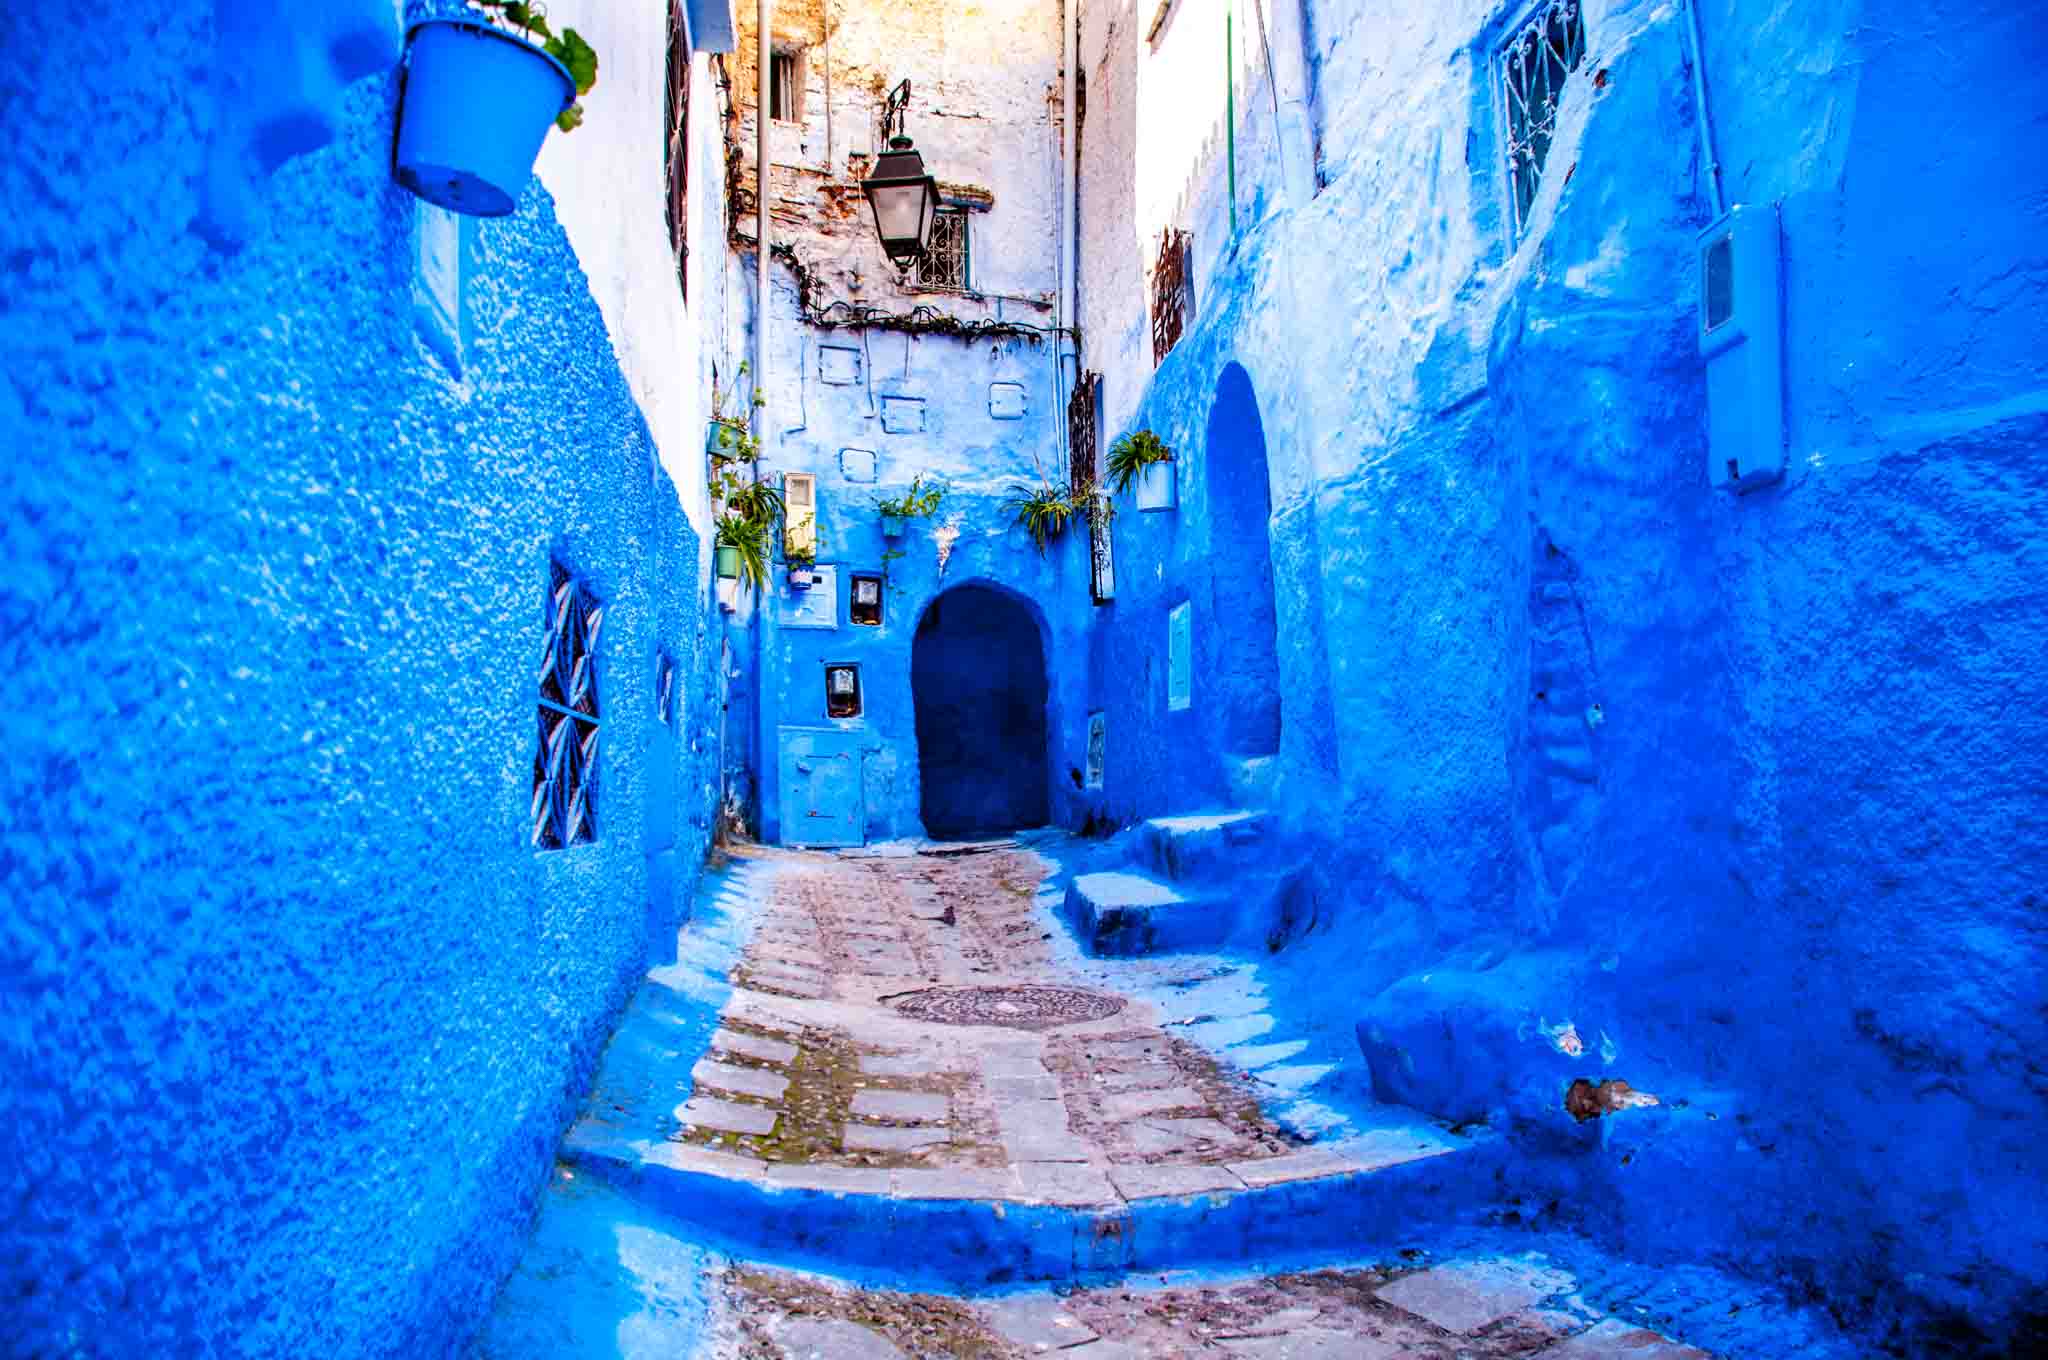 Alleyway in the Blue Pearl, Chefchaouen, Morocco